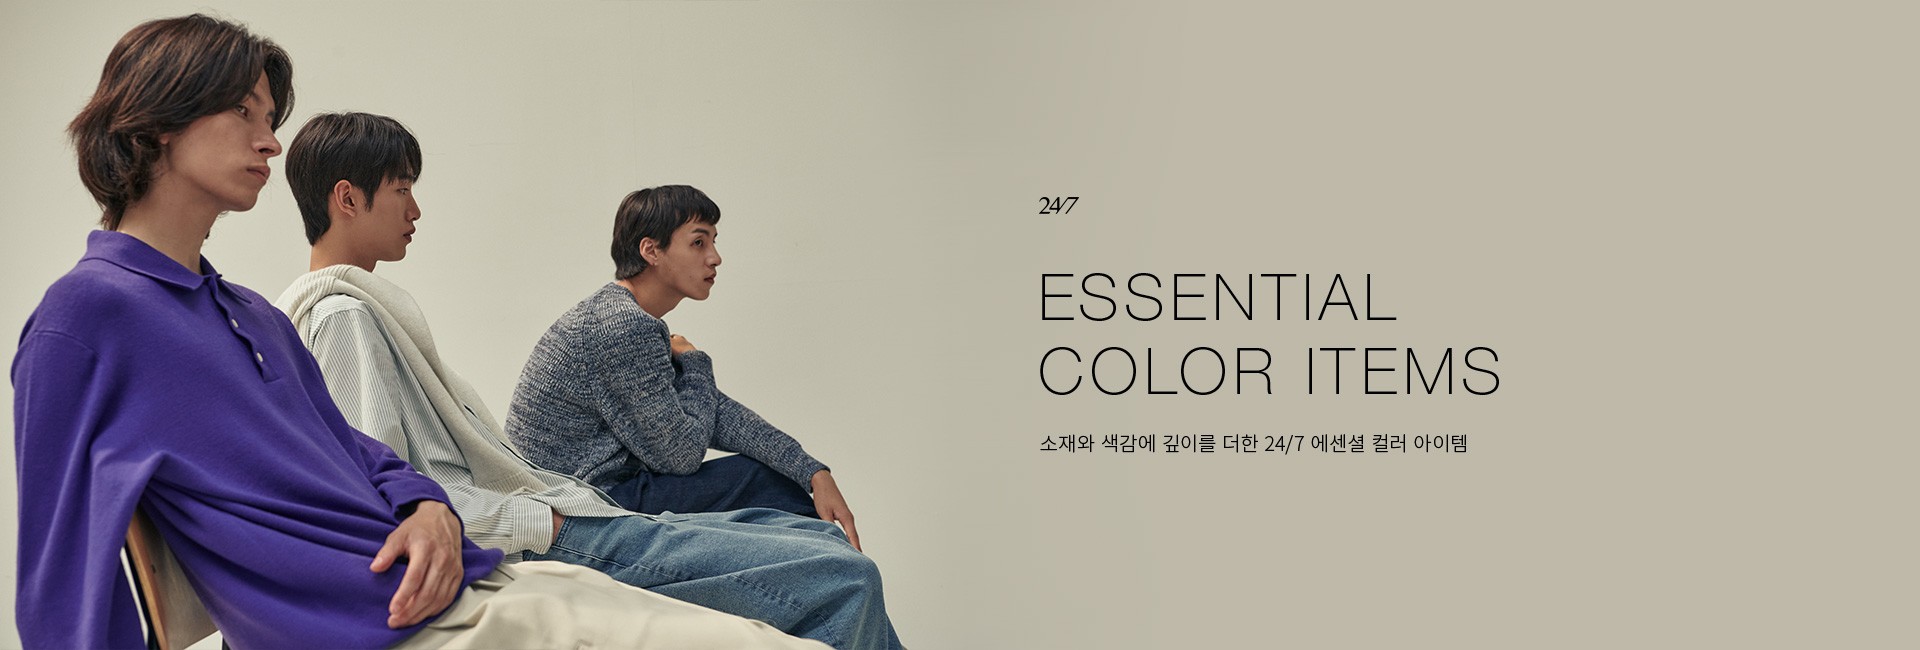 TS_ESSENTIAL COLOR